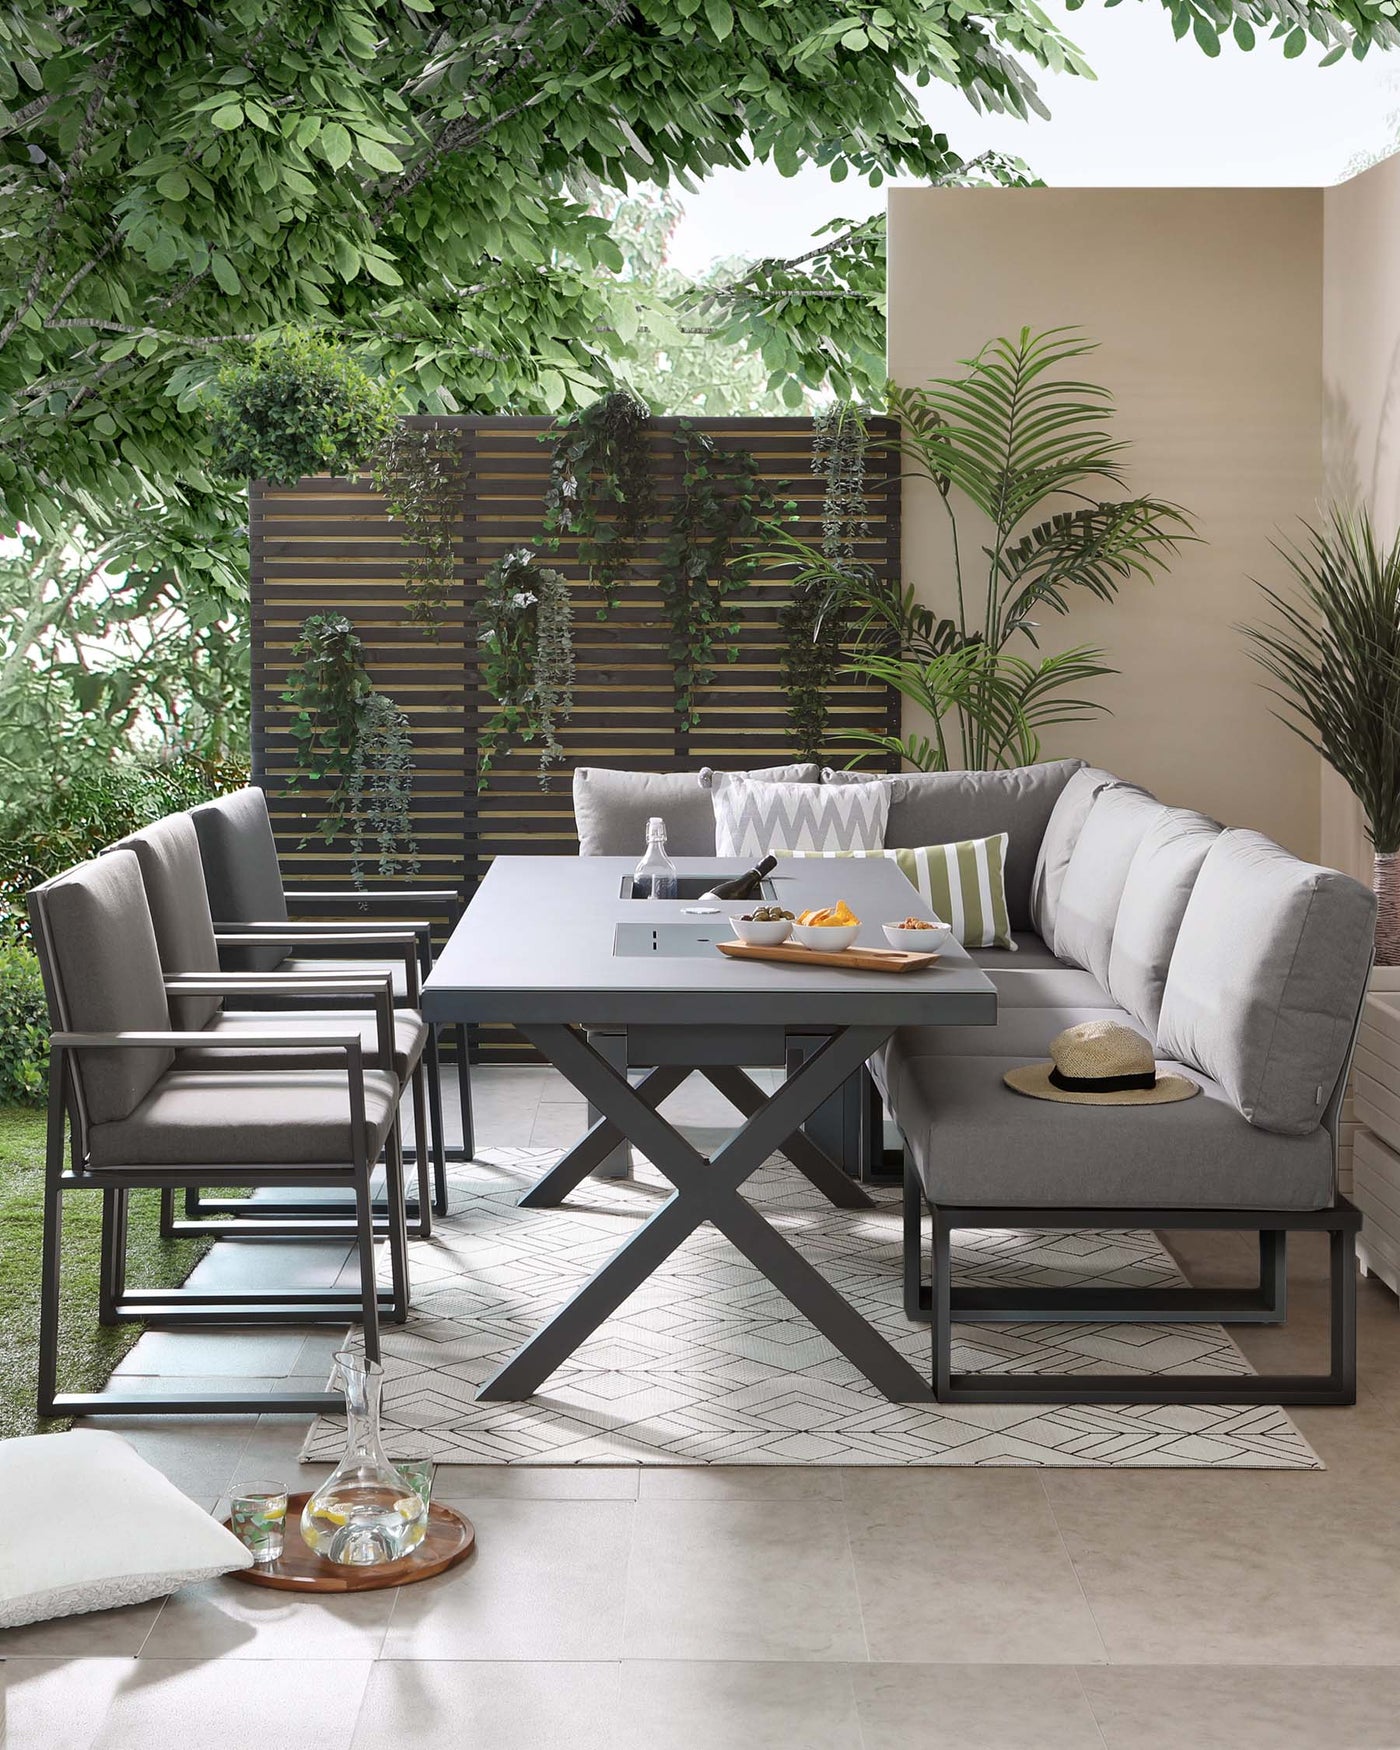 The image showcases a modern outdoor furniture set which includes a rectangular dining table with a sleek grey finish and a distinctive X-shaped base. Accompanied are four dining chairs and a lounge sofa with clean lines and a matching grey colour scheme. The chairs feature comfortable cushions and armrests, while the sofa is outfitted with plush backrest cushions for added comfort. The setting is complemented by green plants and trees, implying a tranquil garden environment.